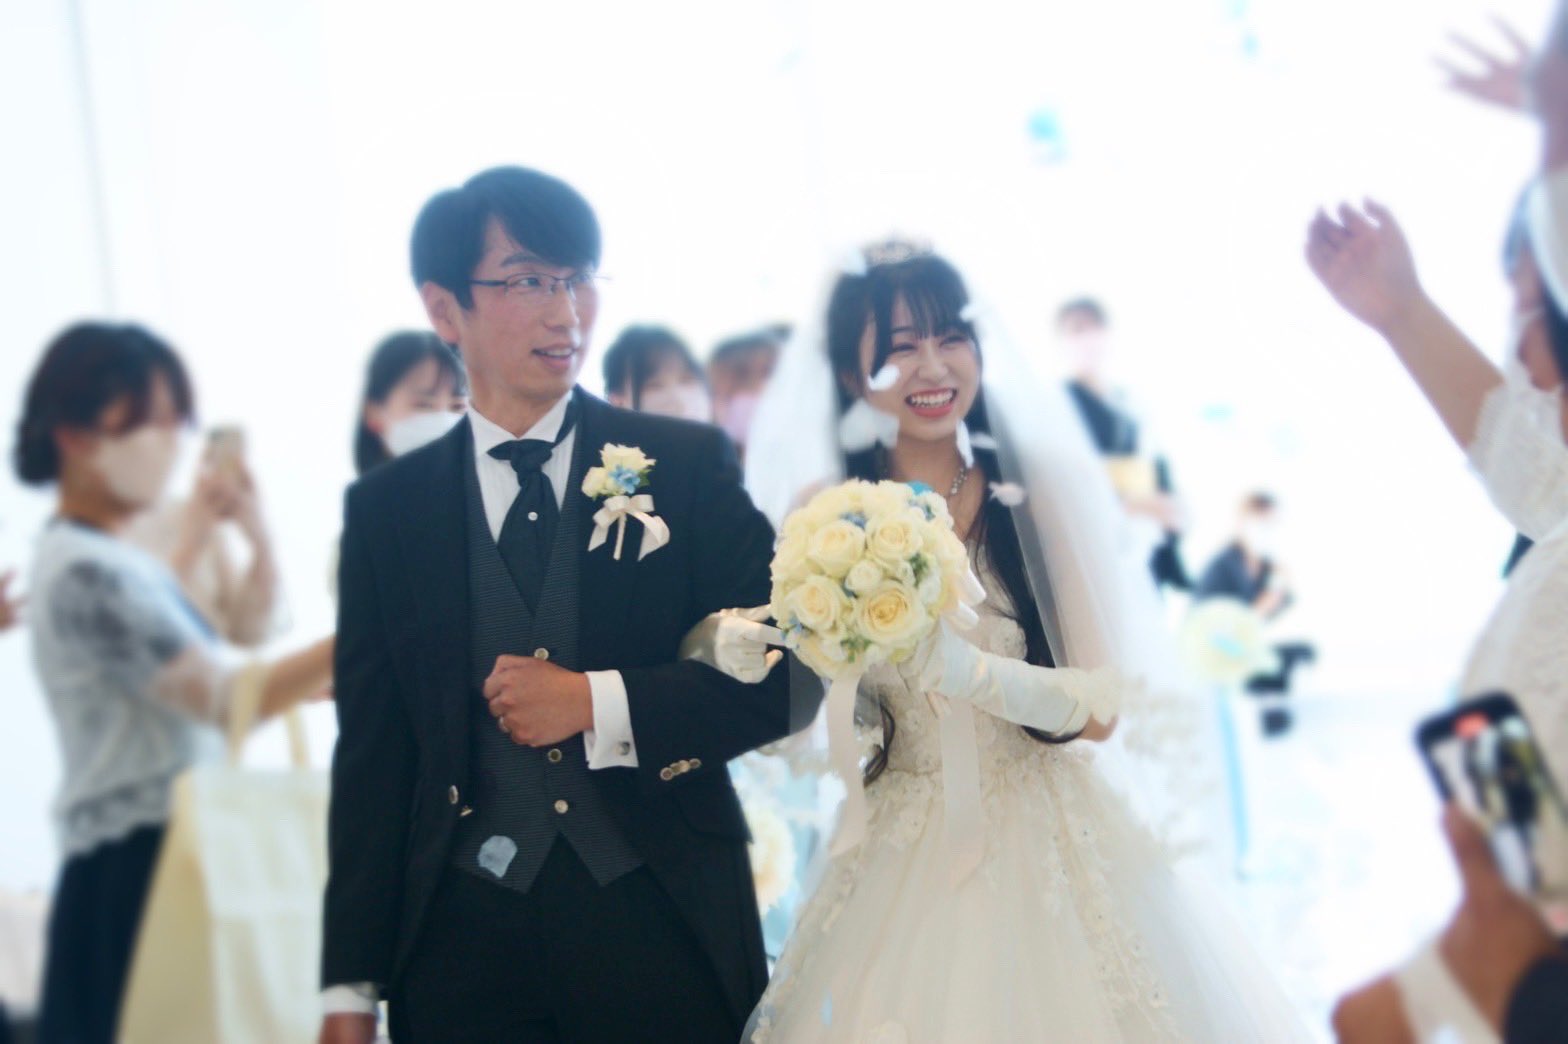 fans married idol mitsuo tomoe 10